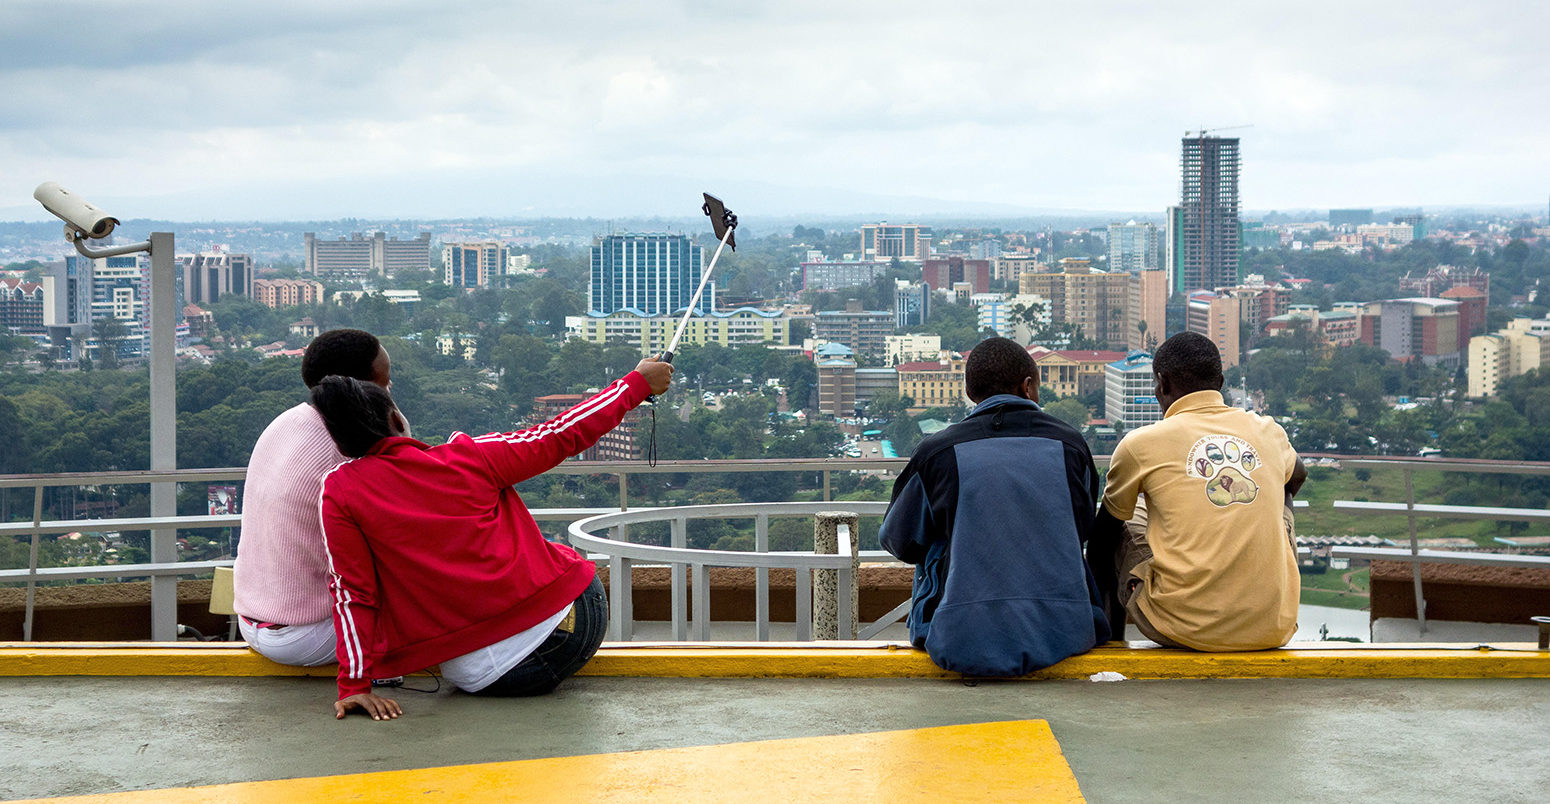 Teenagers taking a selfie looking out over the city in Nairobi, Kenya. Credit: Hugh Mitton / Alamy Stock Photo. G23XN7